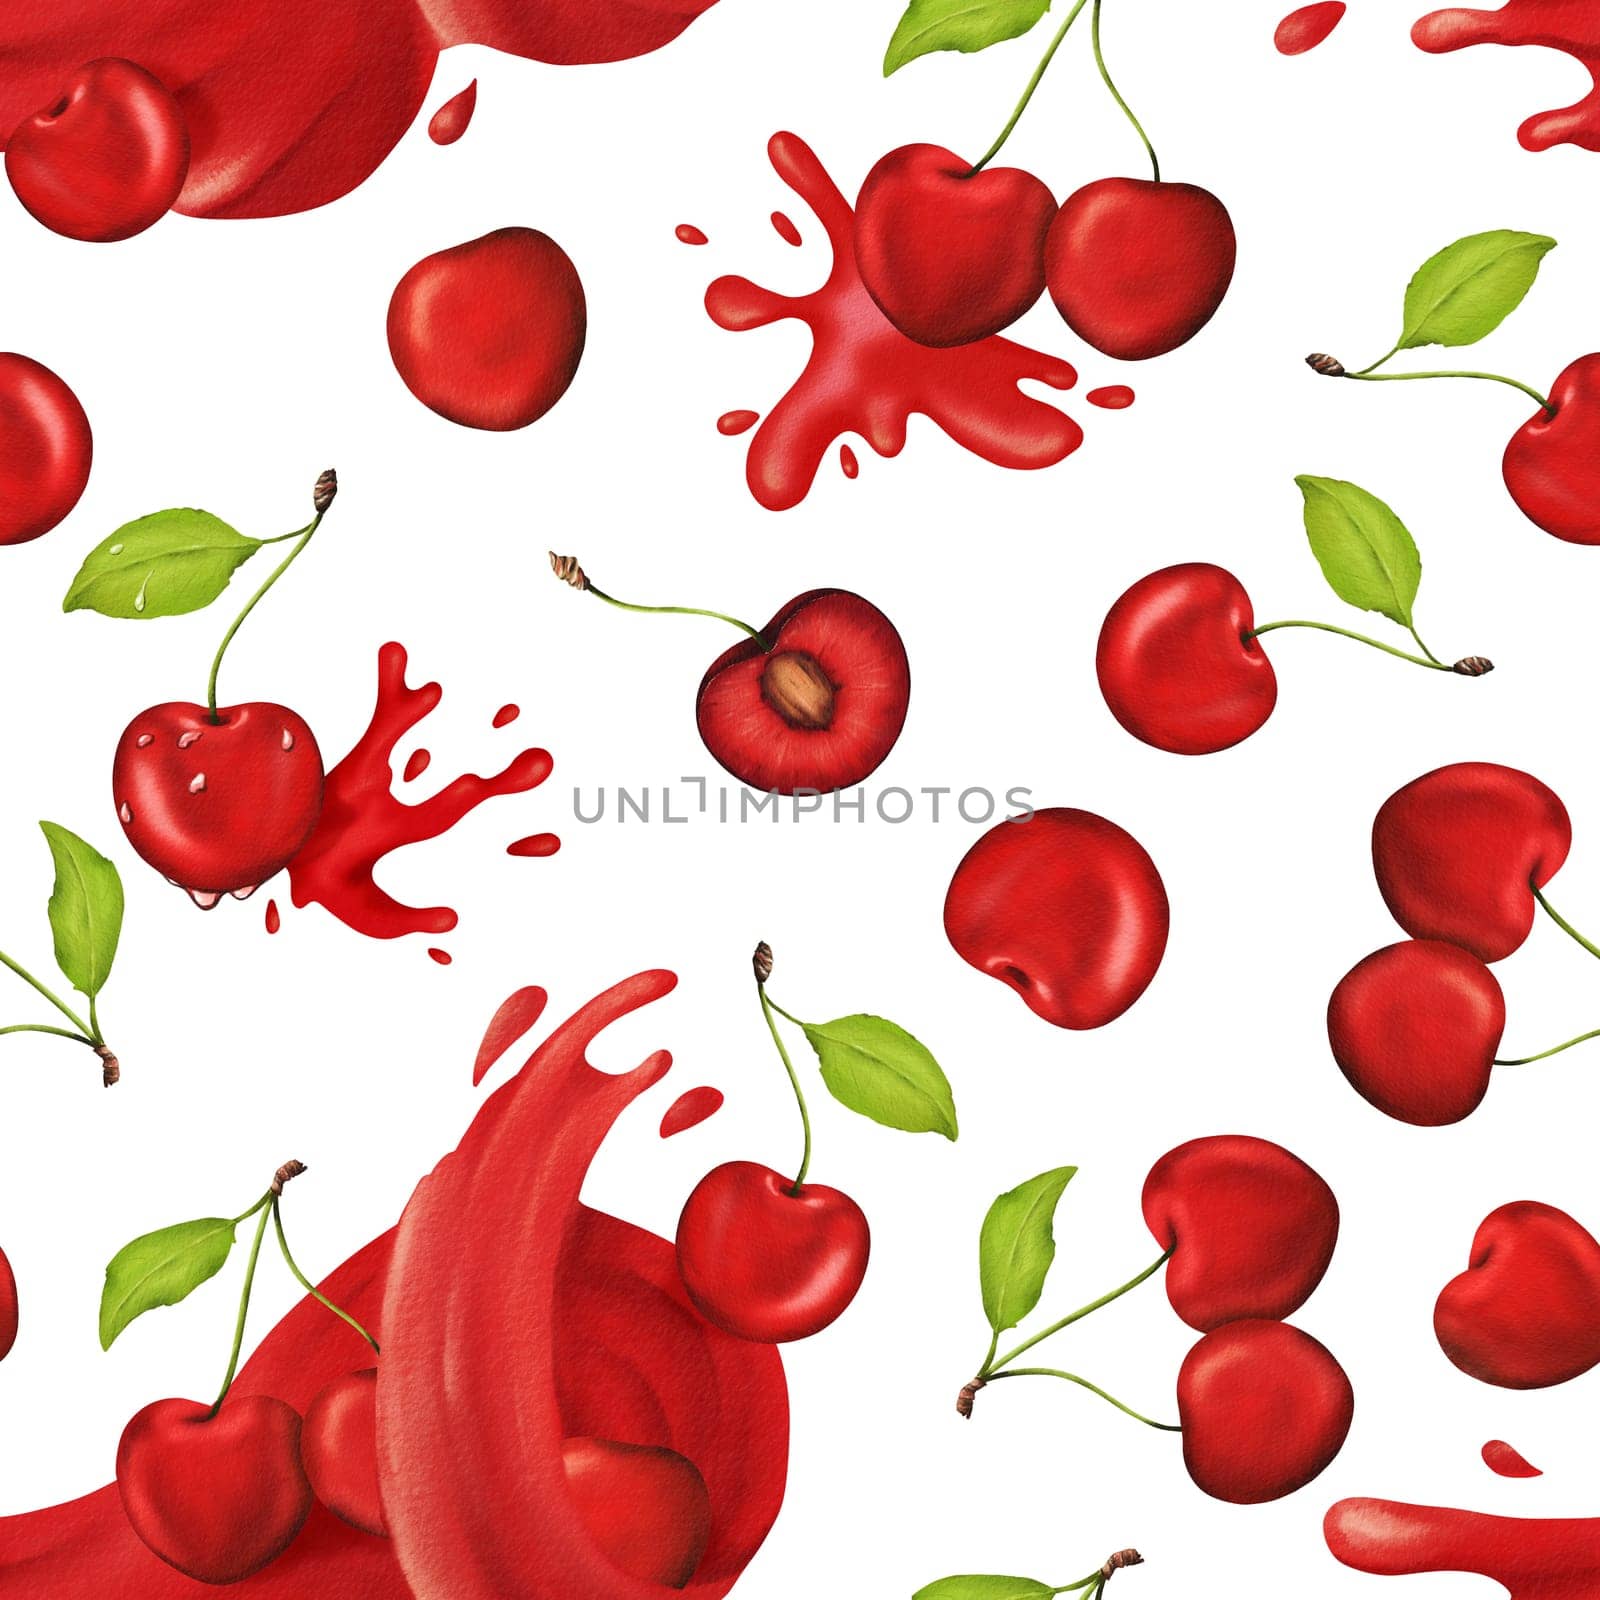 Vibrant, juicy cherries in a seamless watercolor pattern. Ideal for kitchen decor, recipes, textiles, jam labels, aprons, packaging, juices, cherry sweets, and gum by Art_Mari_Ka